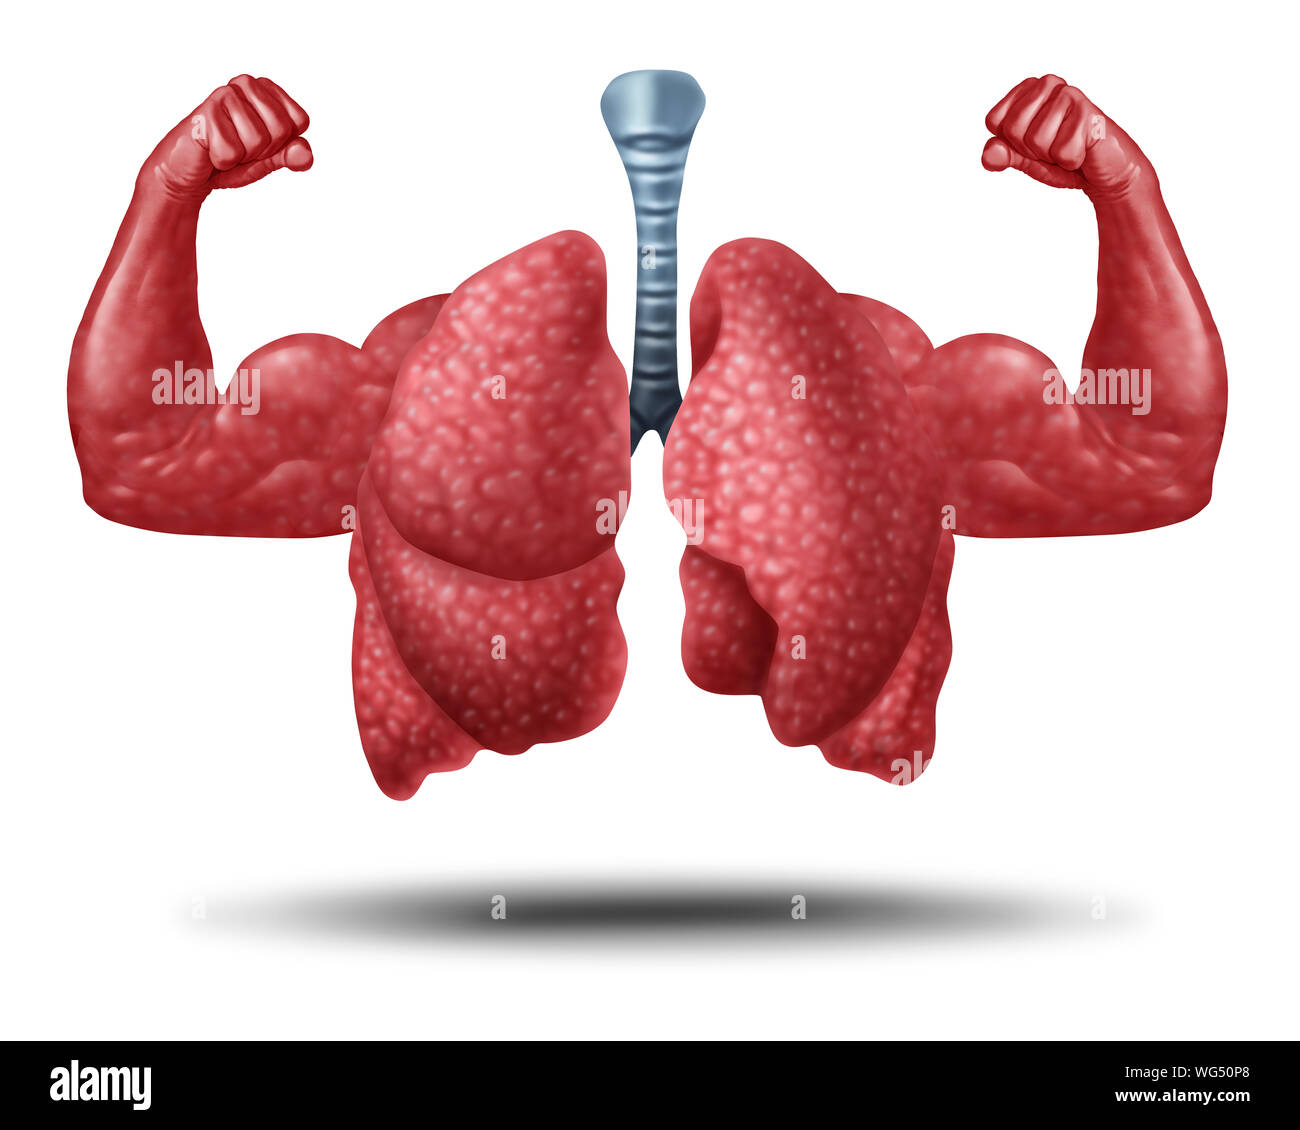 Strong healthy human lungs and powerful cardiovascular with muscle biceps in a 3D illustration style. Stock Photo